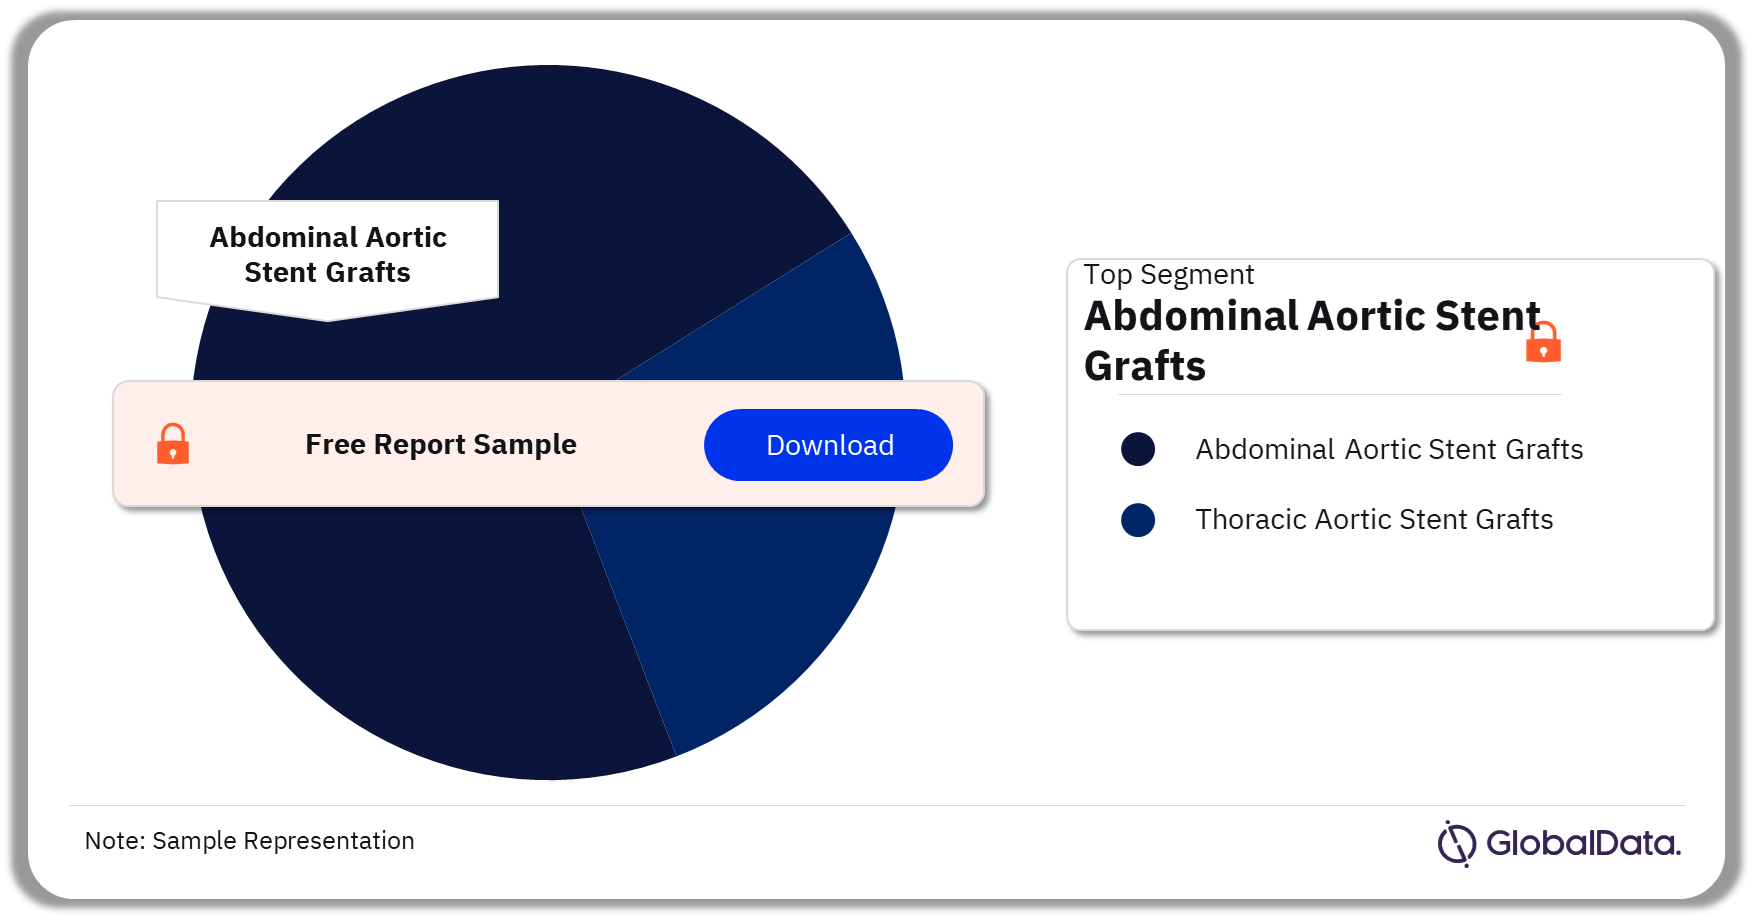 Aortic Stent Grafts Pipeline Market Analysis by Segments, 2023 (%)